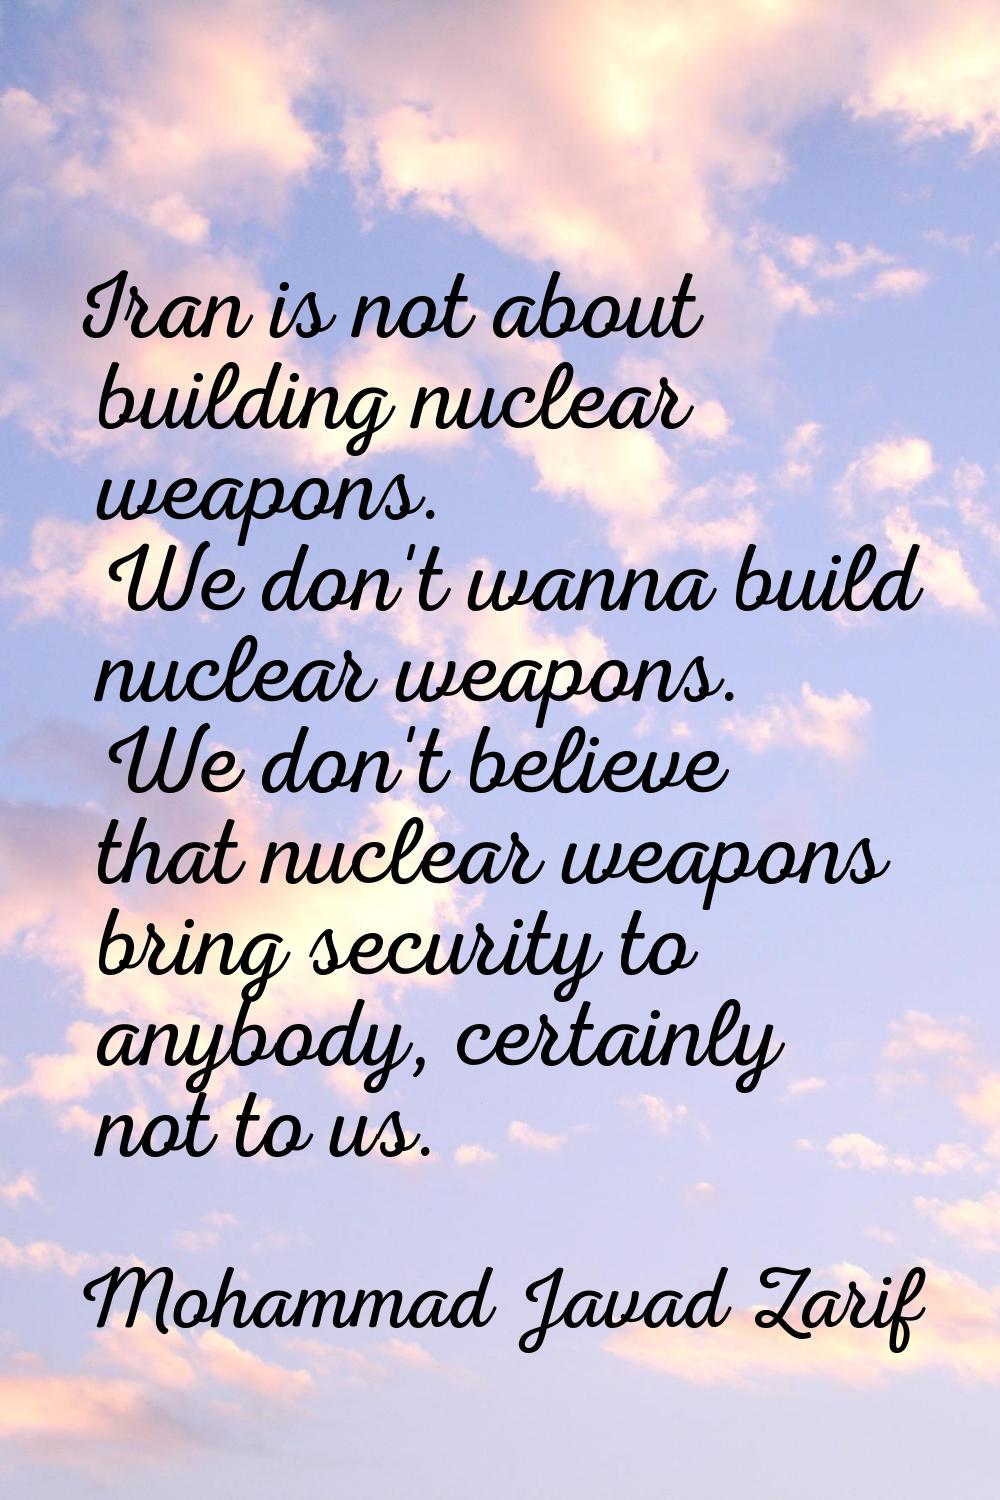 Iran is not about building nuclear weapons. We don't wanna build nuclear weapons. We don't believe 